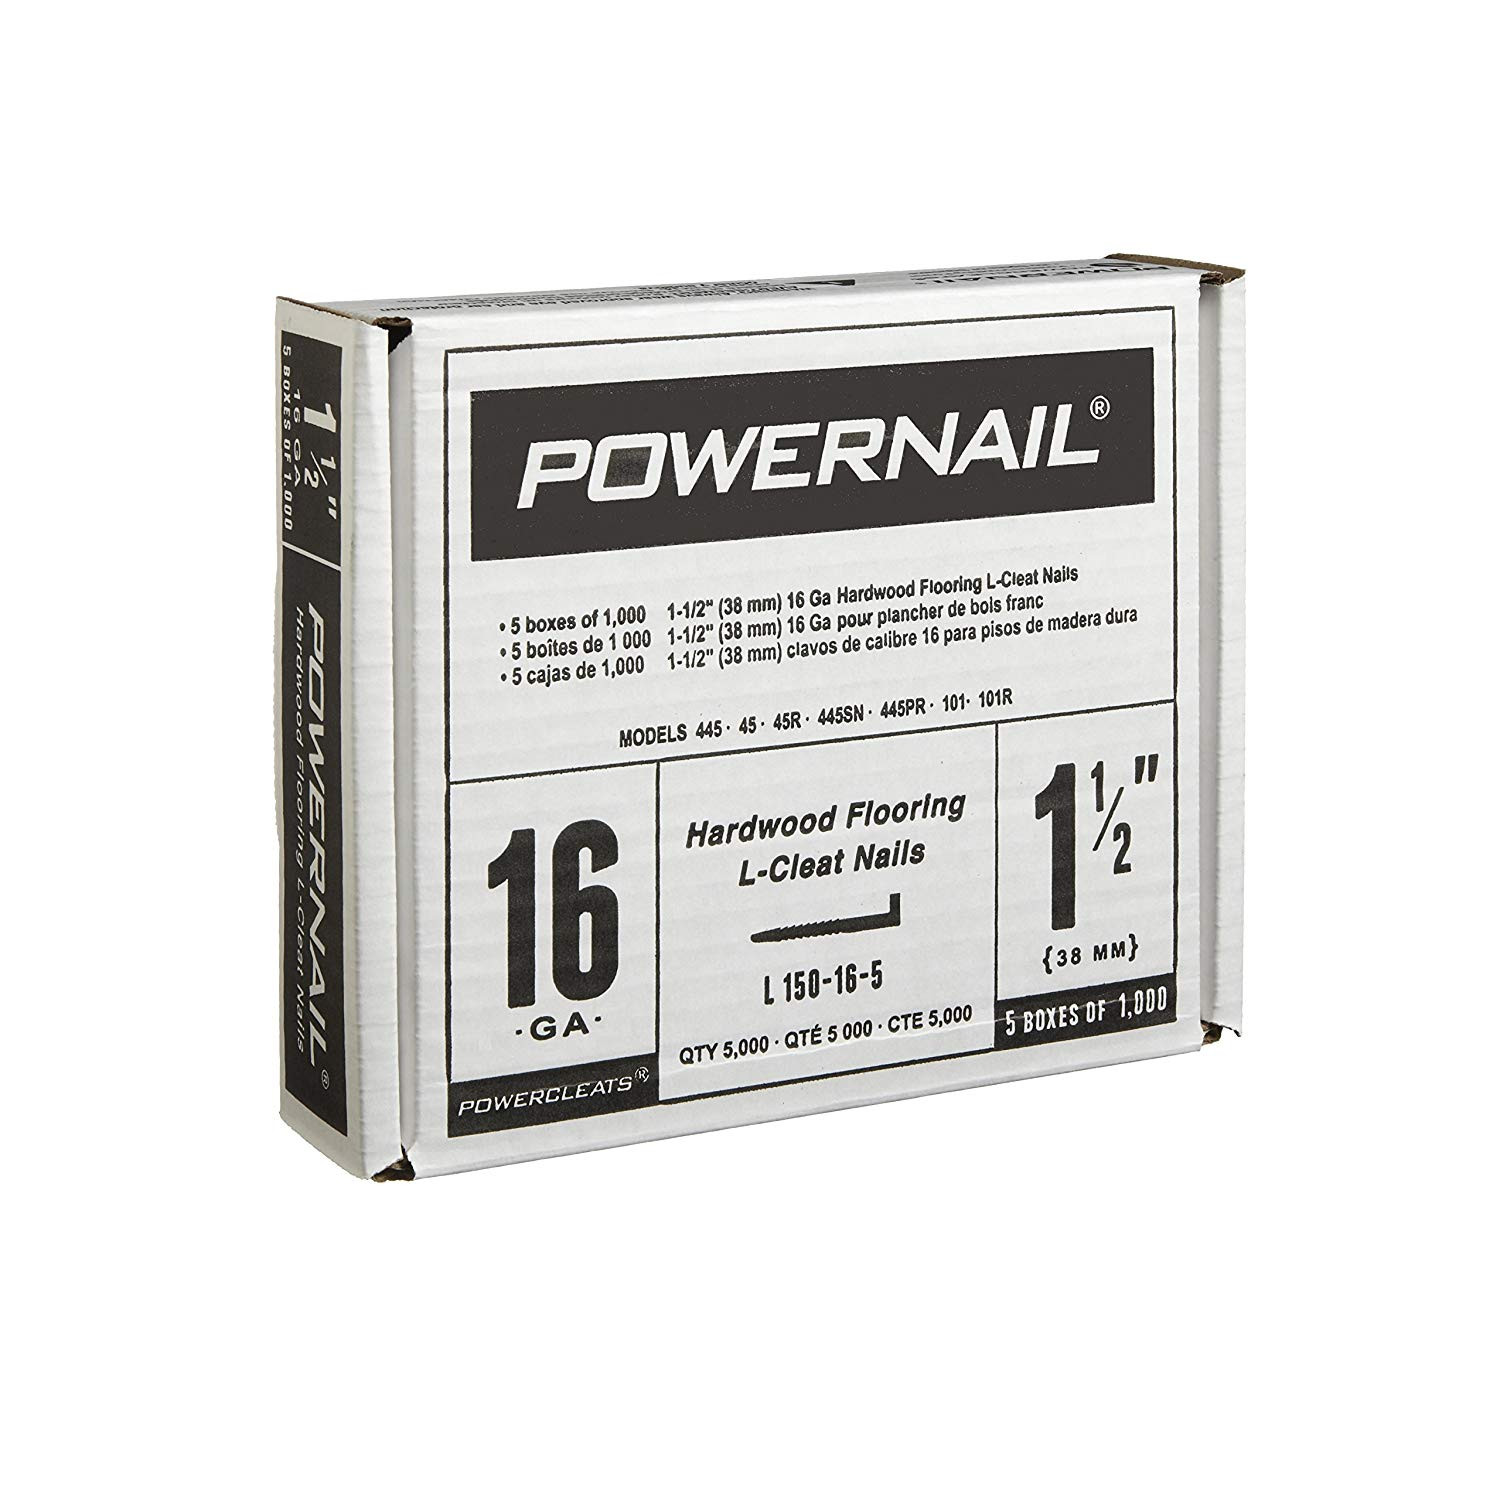 30 Fabulous 3 1 2 Inch Hardwood Flooring 2024 free download 3 1 2 inch hardwood flooring of amazon com powernail powercleat 16ga 2 l cleat box of 5000 home with amazon com powernail powercleat 16ga 2 l cleat box of 5000 home improvement